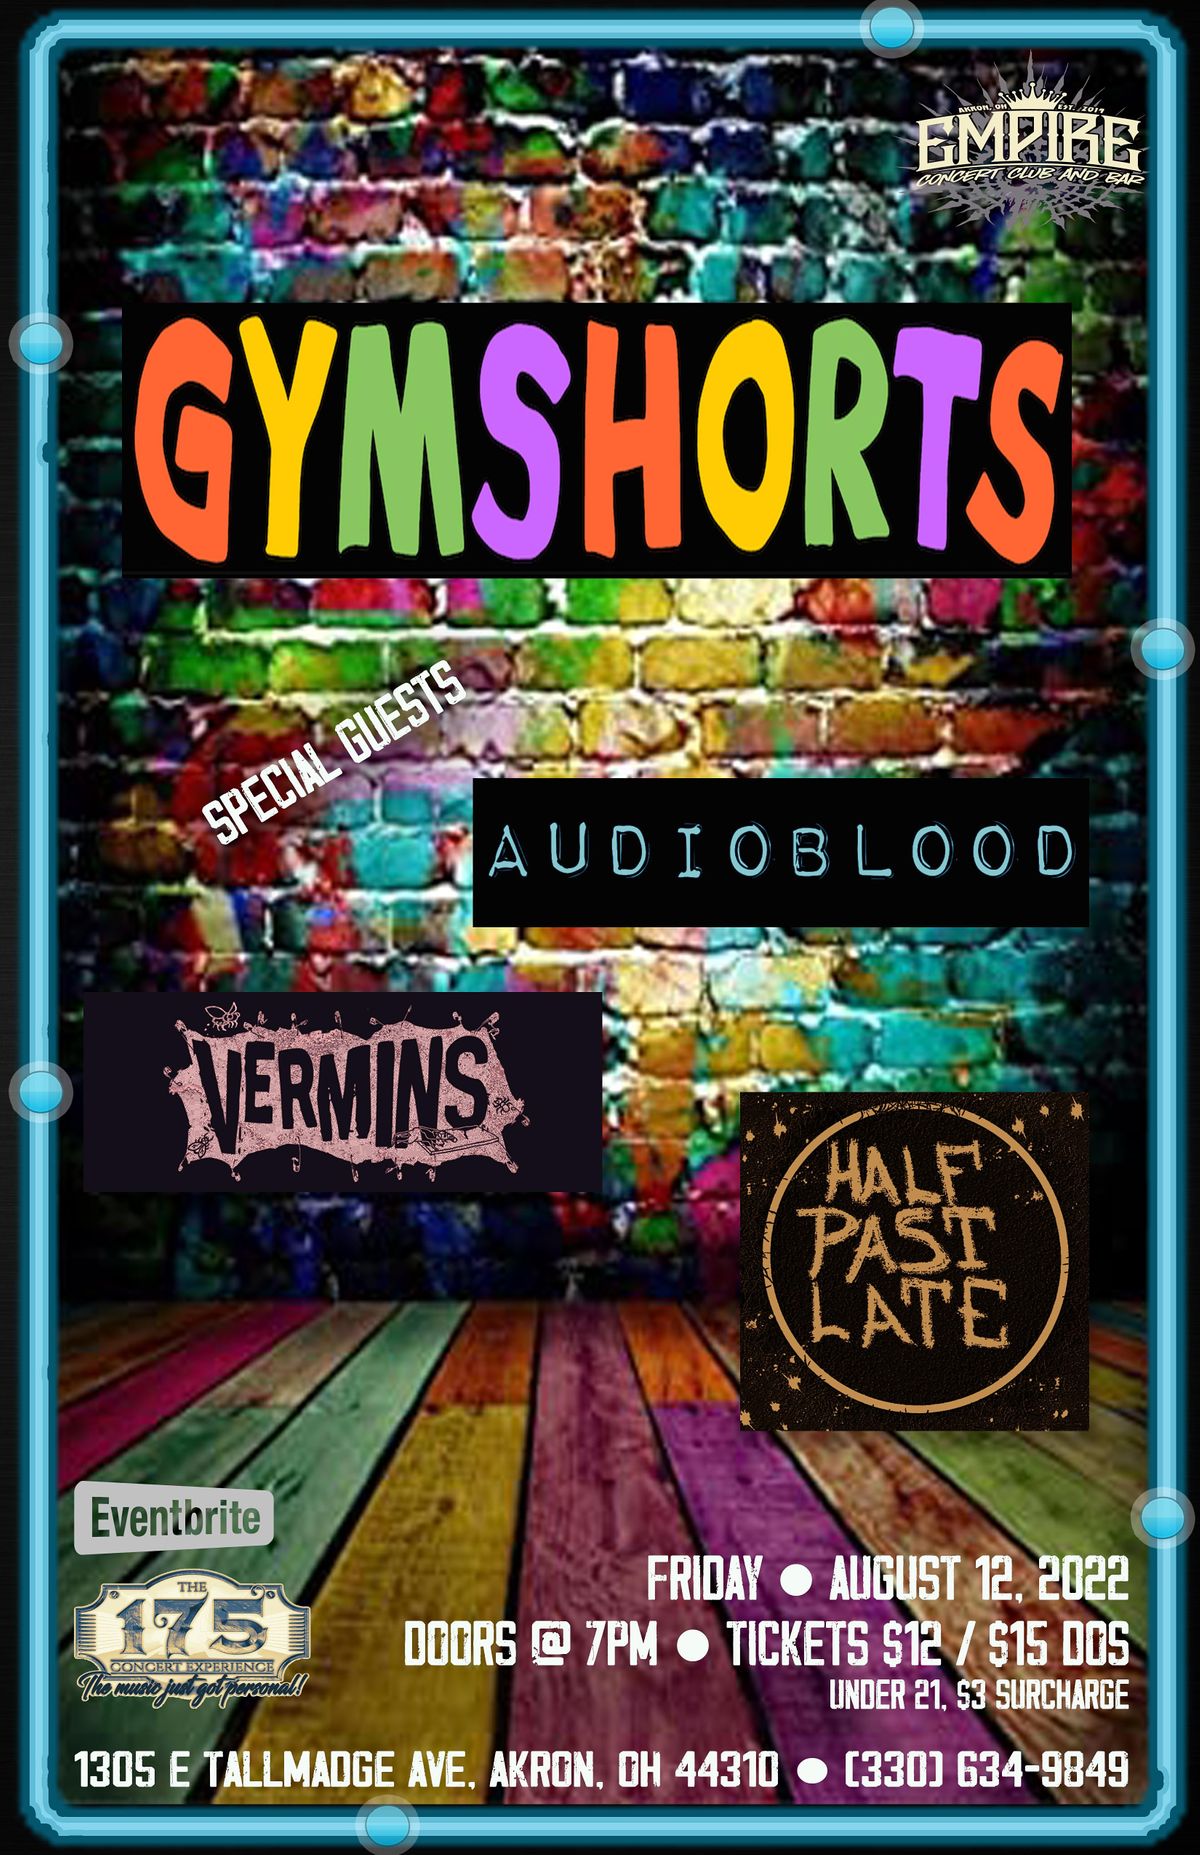 Gymshorts at The Empire!